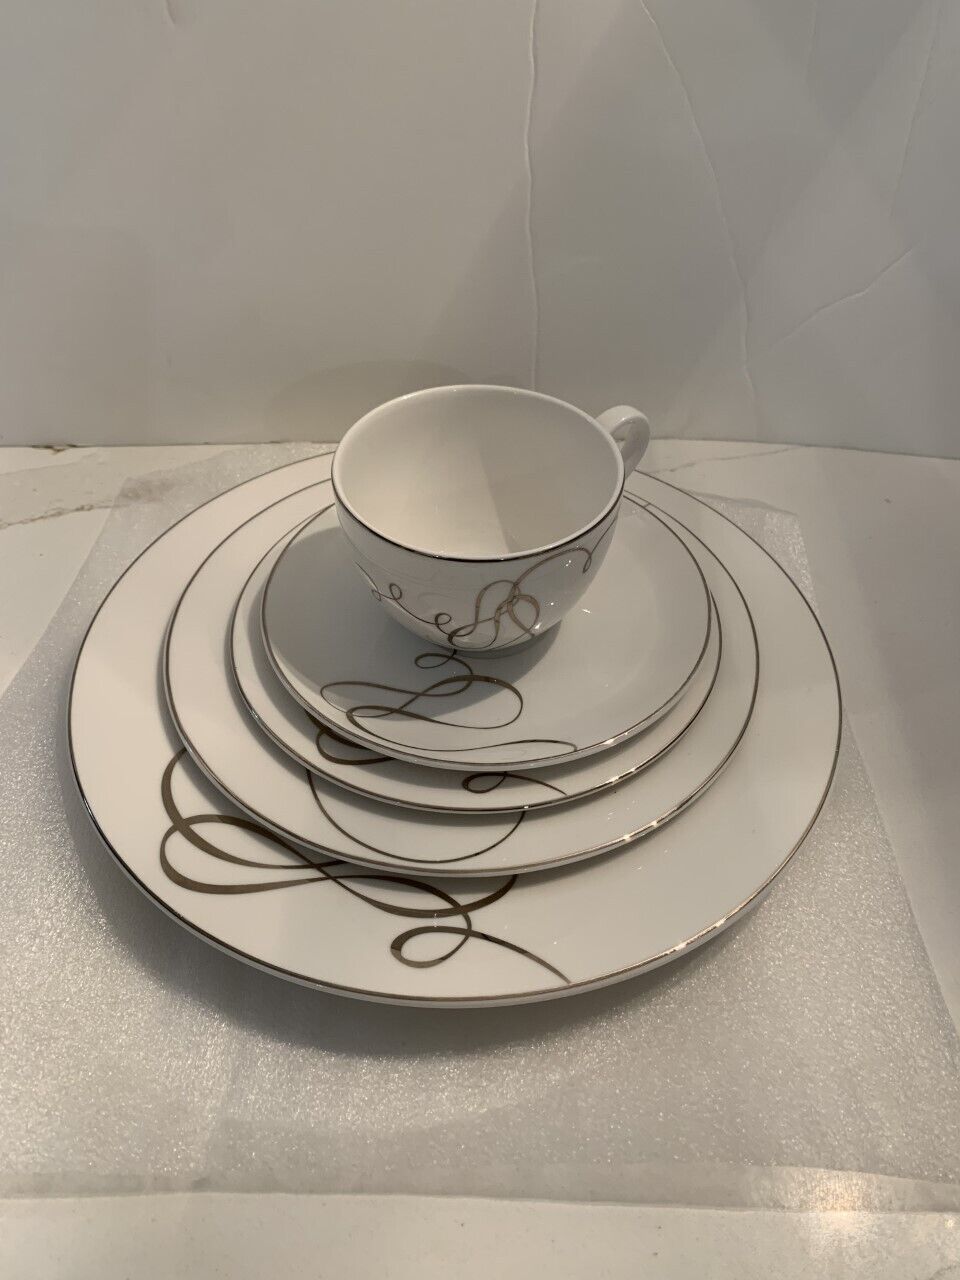 Mikasa Love Story Porcelain Dinnerware Plates Dishes 5 Piece